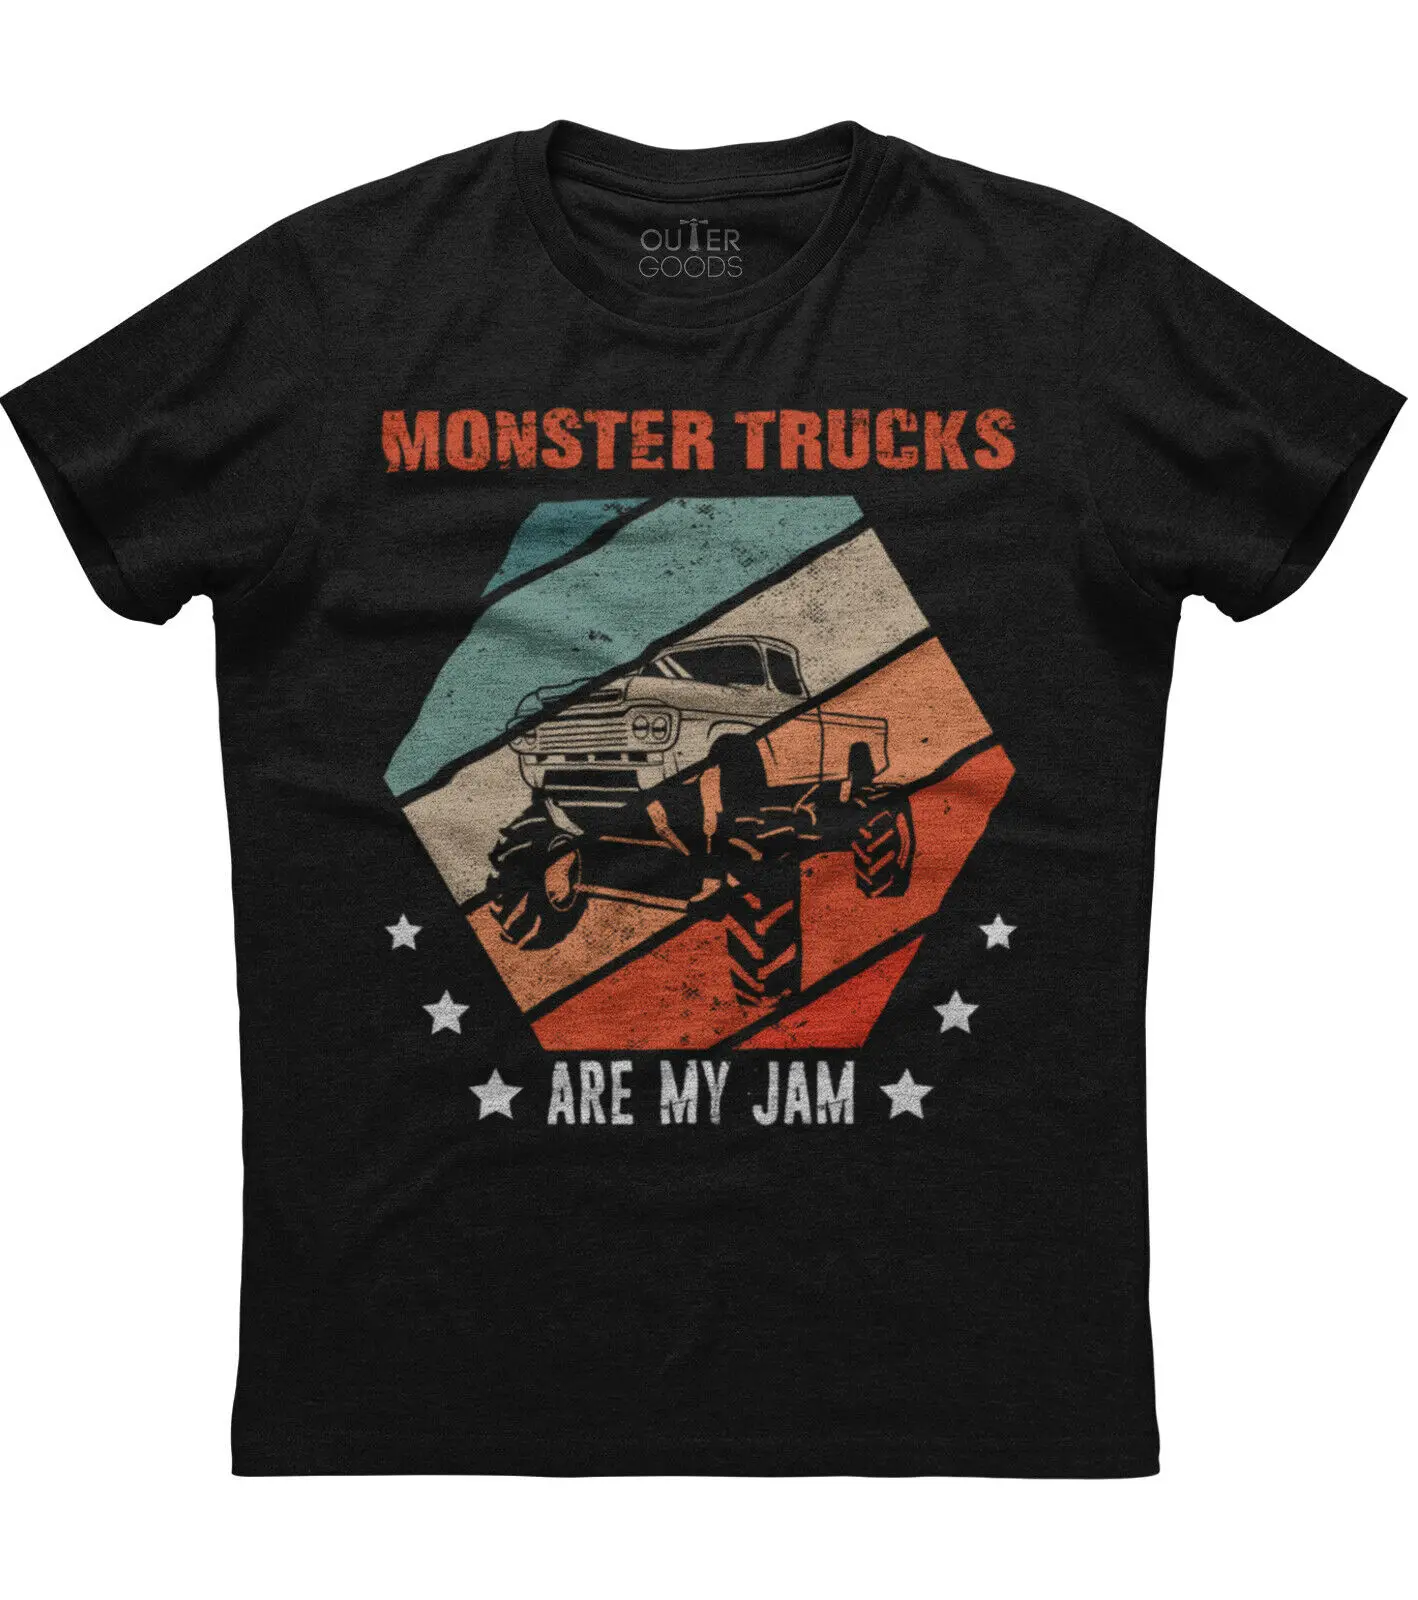 

Monster Truck Are My Jam. Funny Vintage Sunset Graphic Engines T-Shirt. Summer Cotton O-Neck Short Sleeve Mens T Shirt New S-3XL